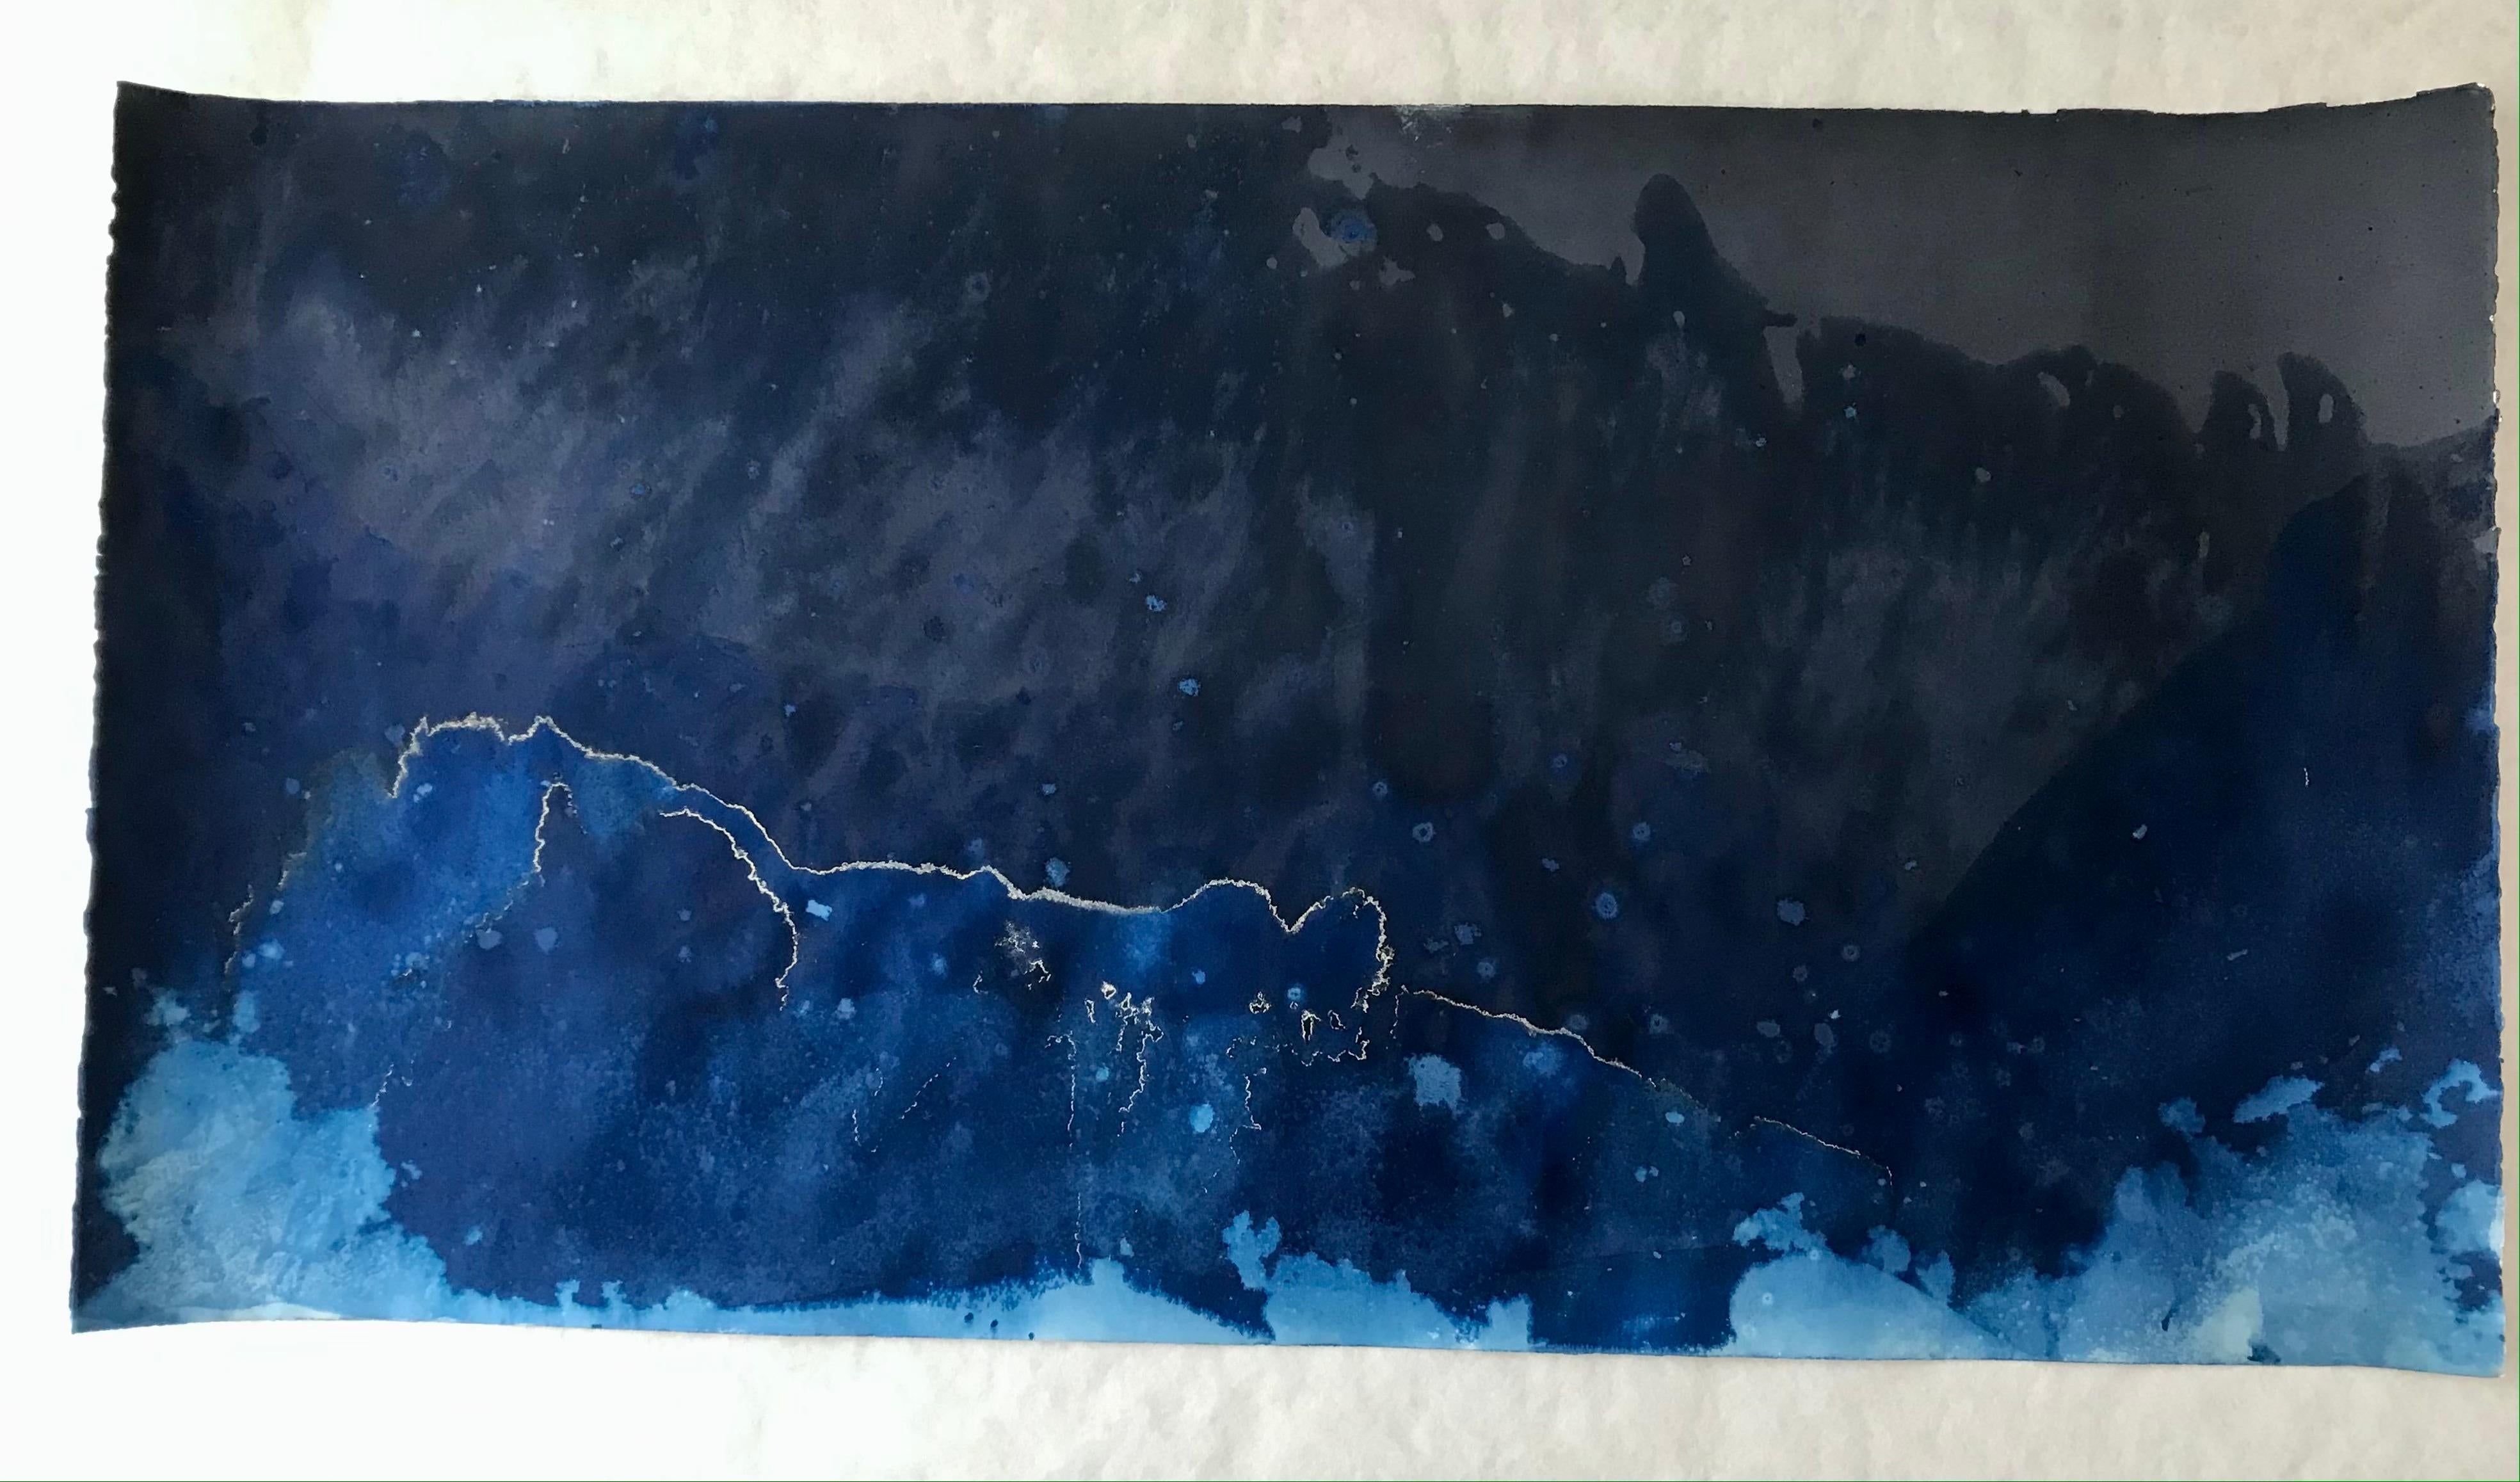 28° 14' 22.942''N, 114° 6' 4.129'' W-12. Cyanotype photograph of the ocean waves - Photograph by Paola Davila